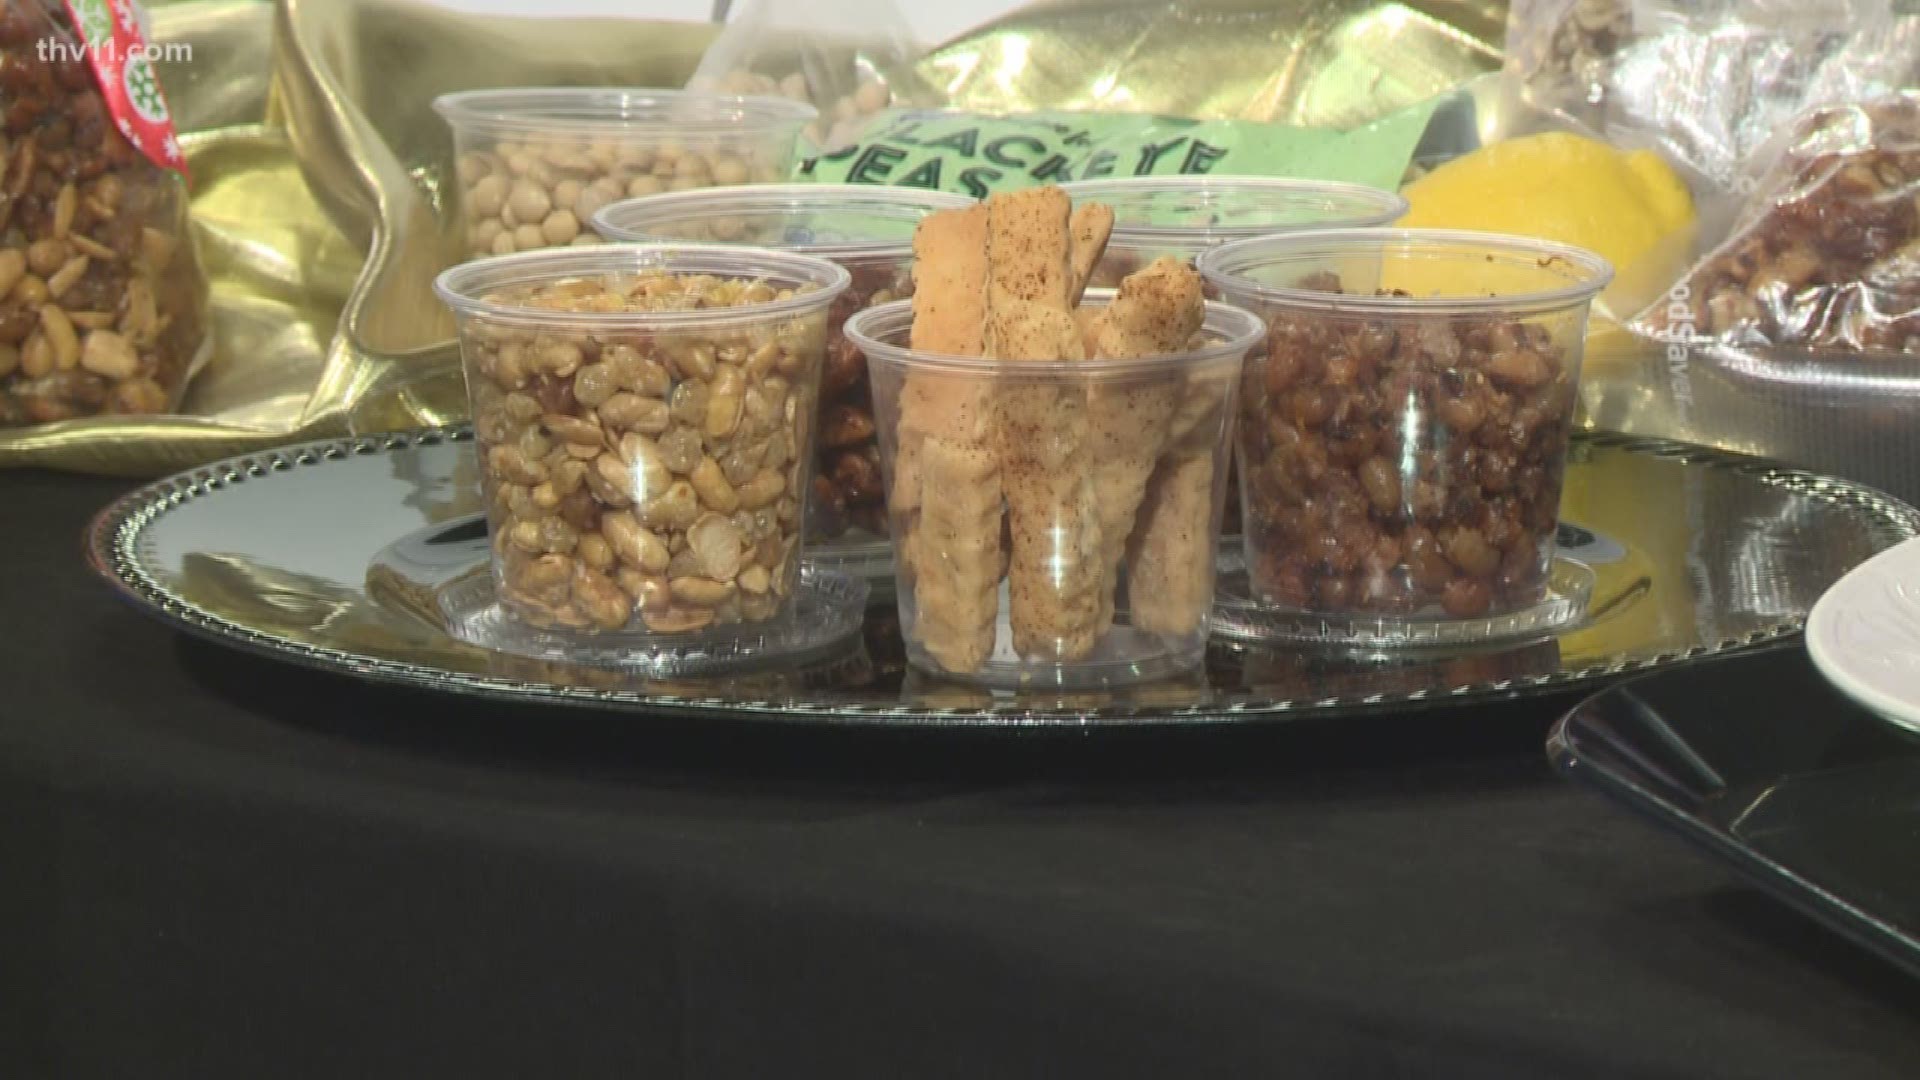 It's day four of the 11 Days of Giveaways and Debbie Arnold joined THV11 This Morning to show us how to make a tasty trail mix and give away a basket full of cooking goodies, and a gift card!